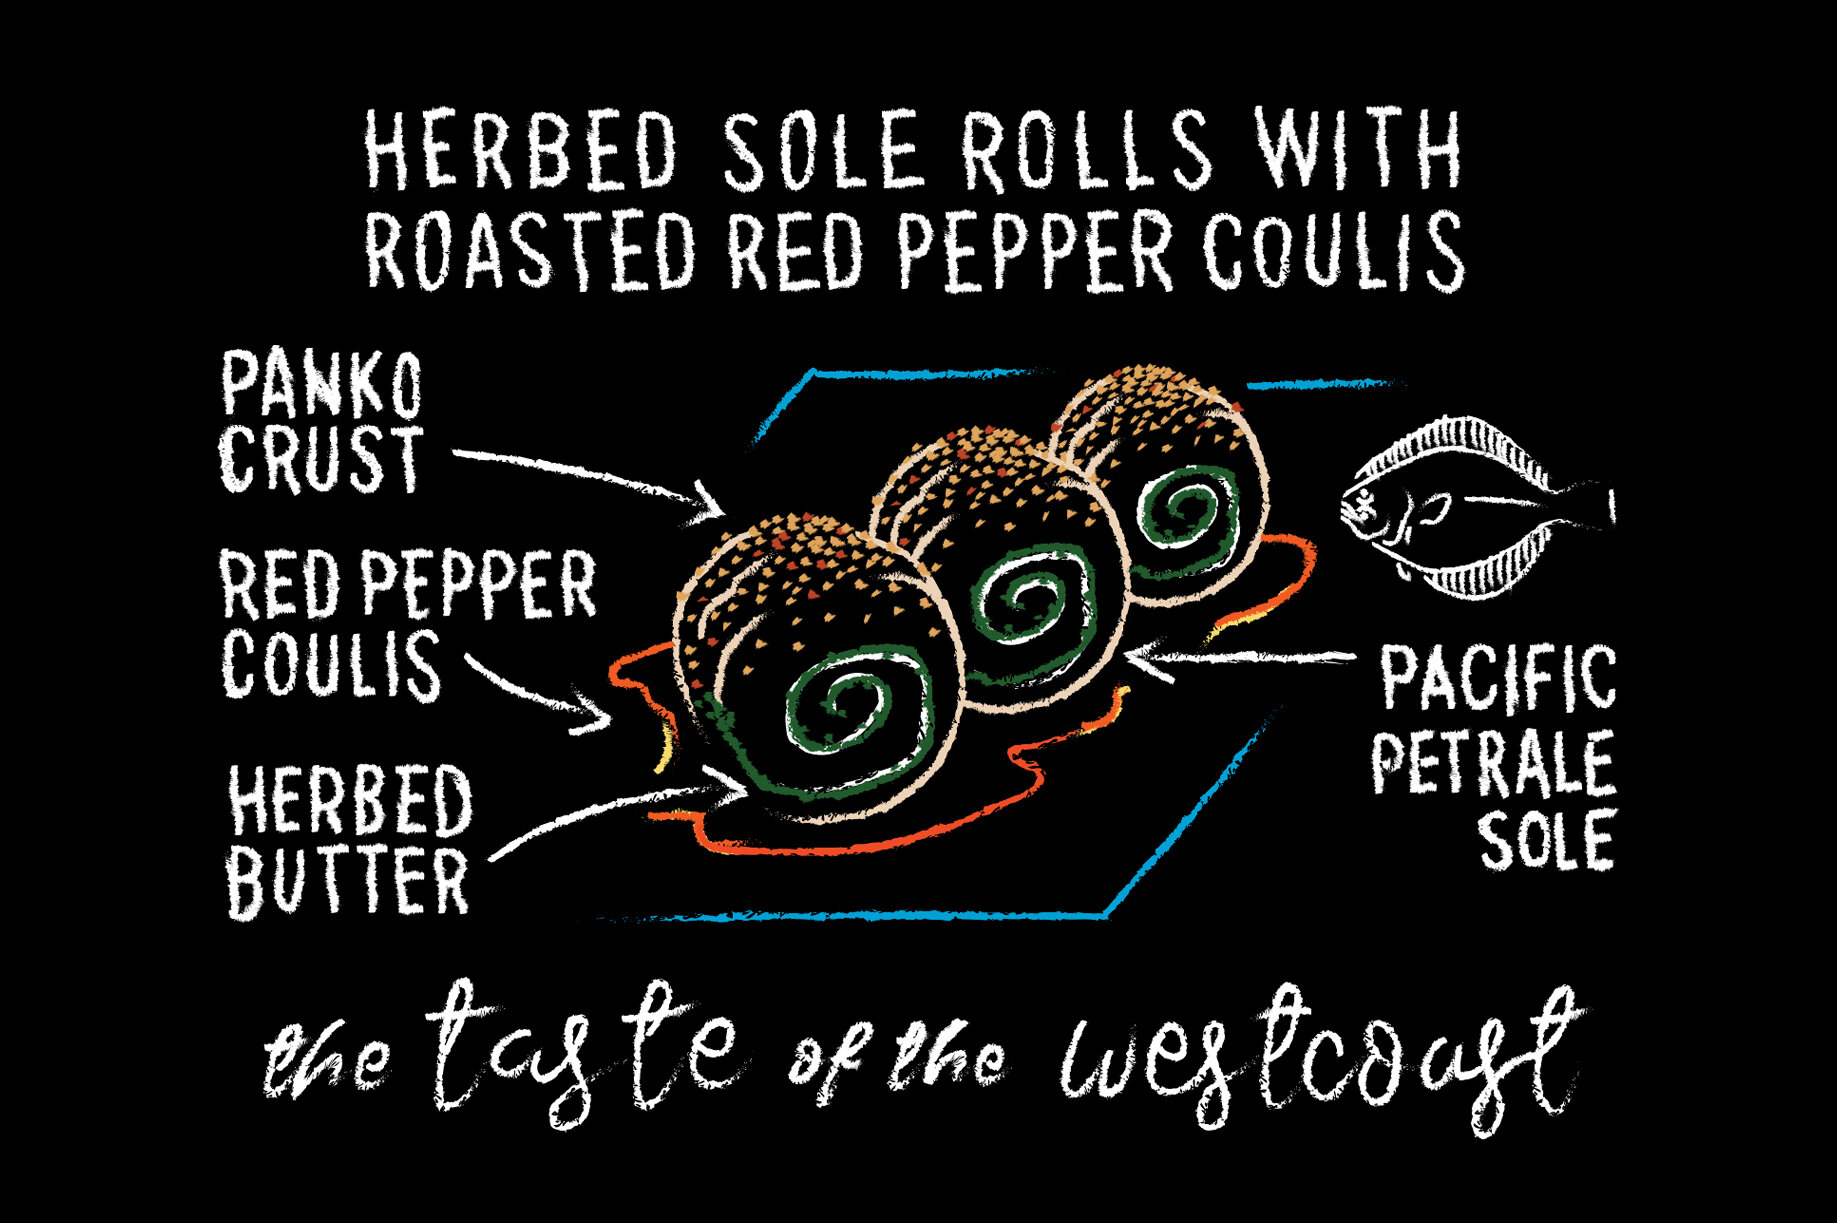 Herbed Petrale Sole Rolls with Roasted Red Pepper Coulis (Copy)